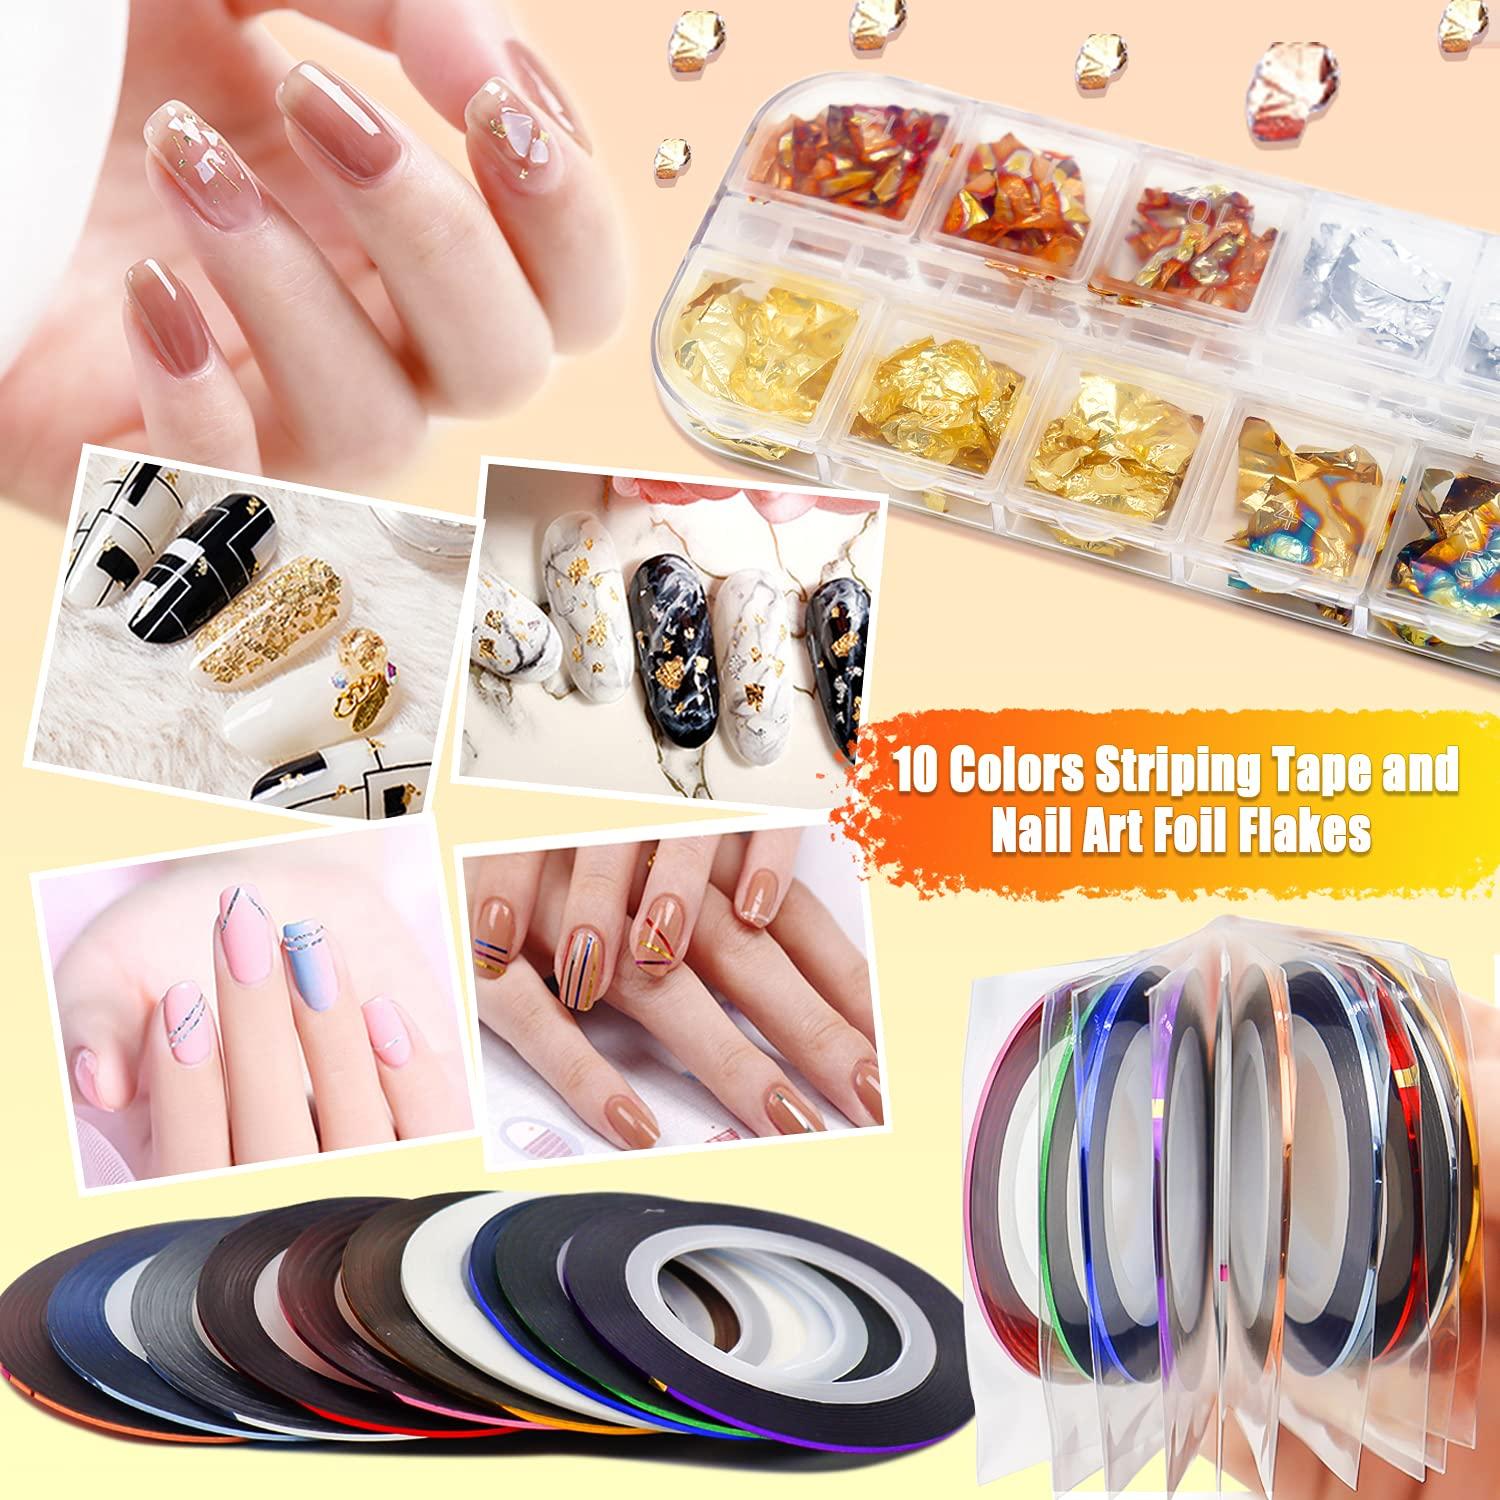 FOIL FLAKES for NAILS Gift Set of 10 Assorted Foils Ready to 